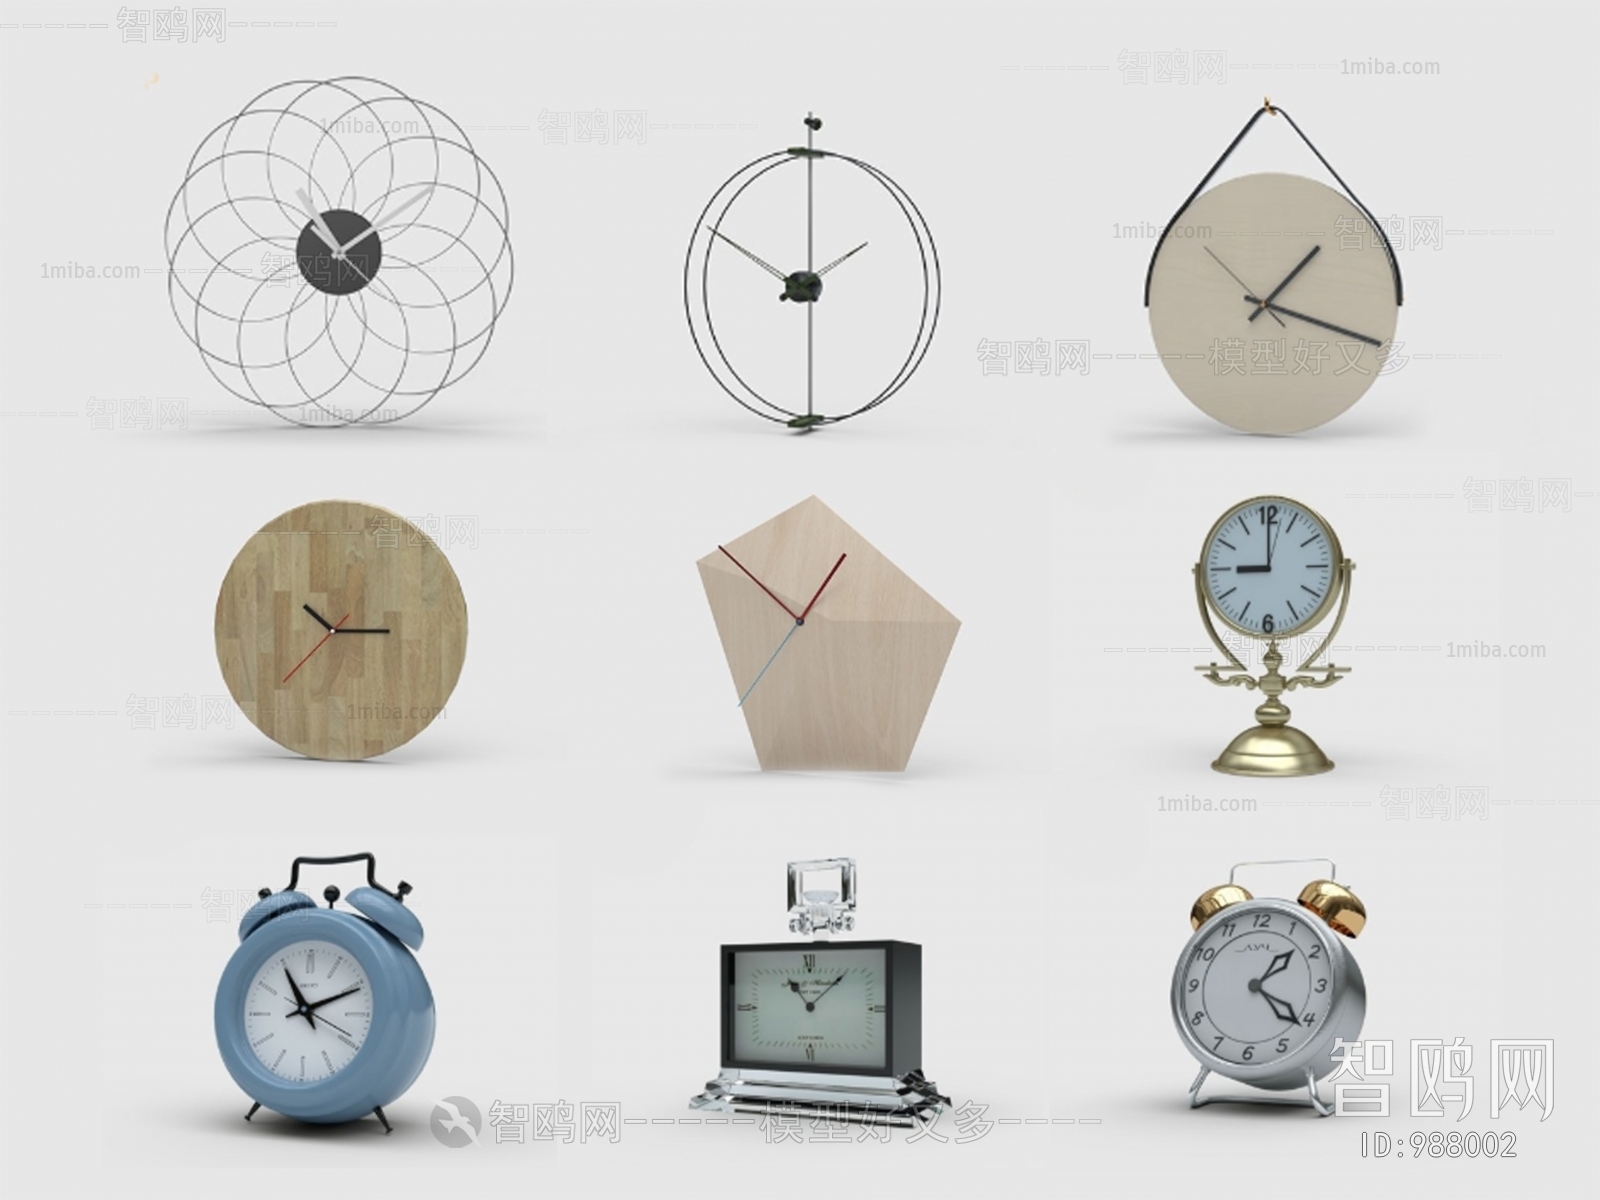 Modern Clocks And Watches